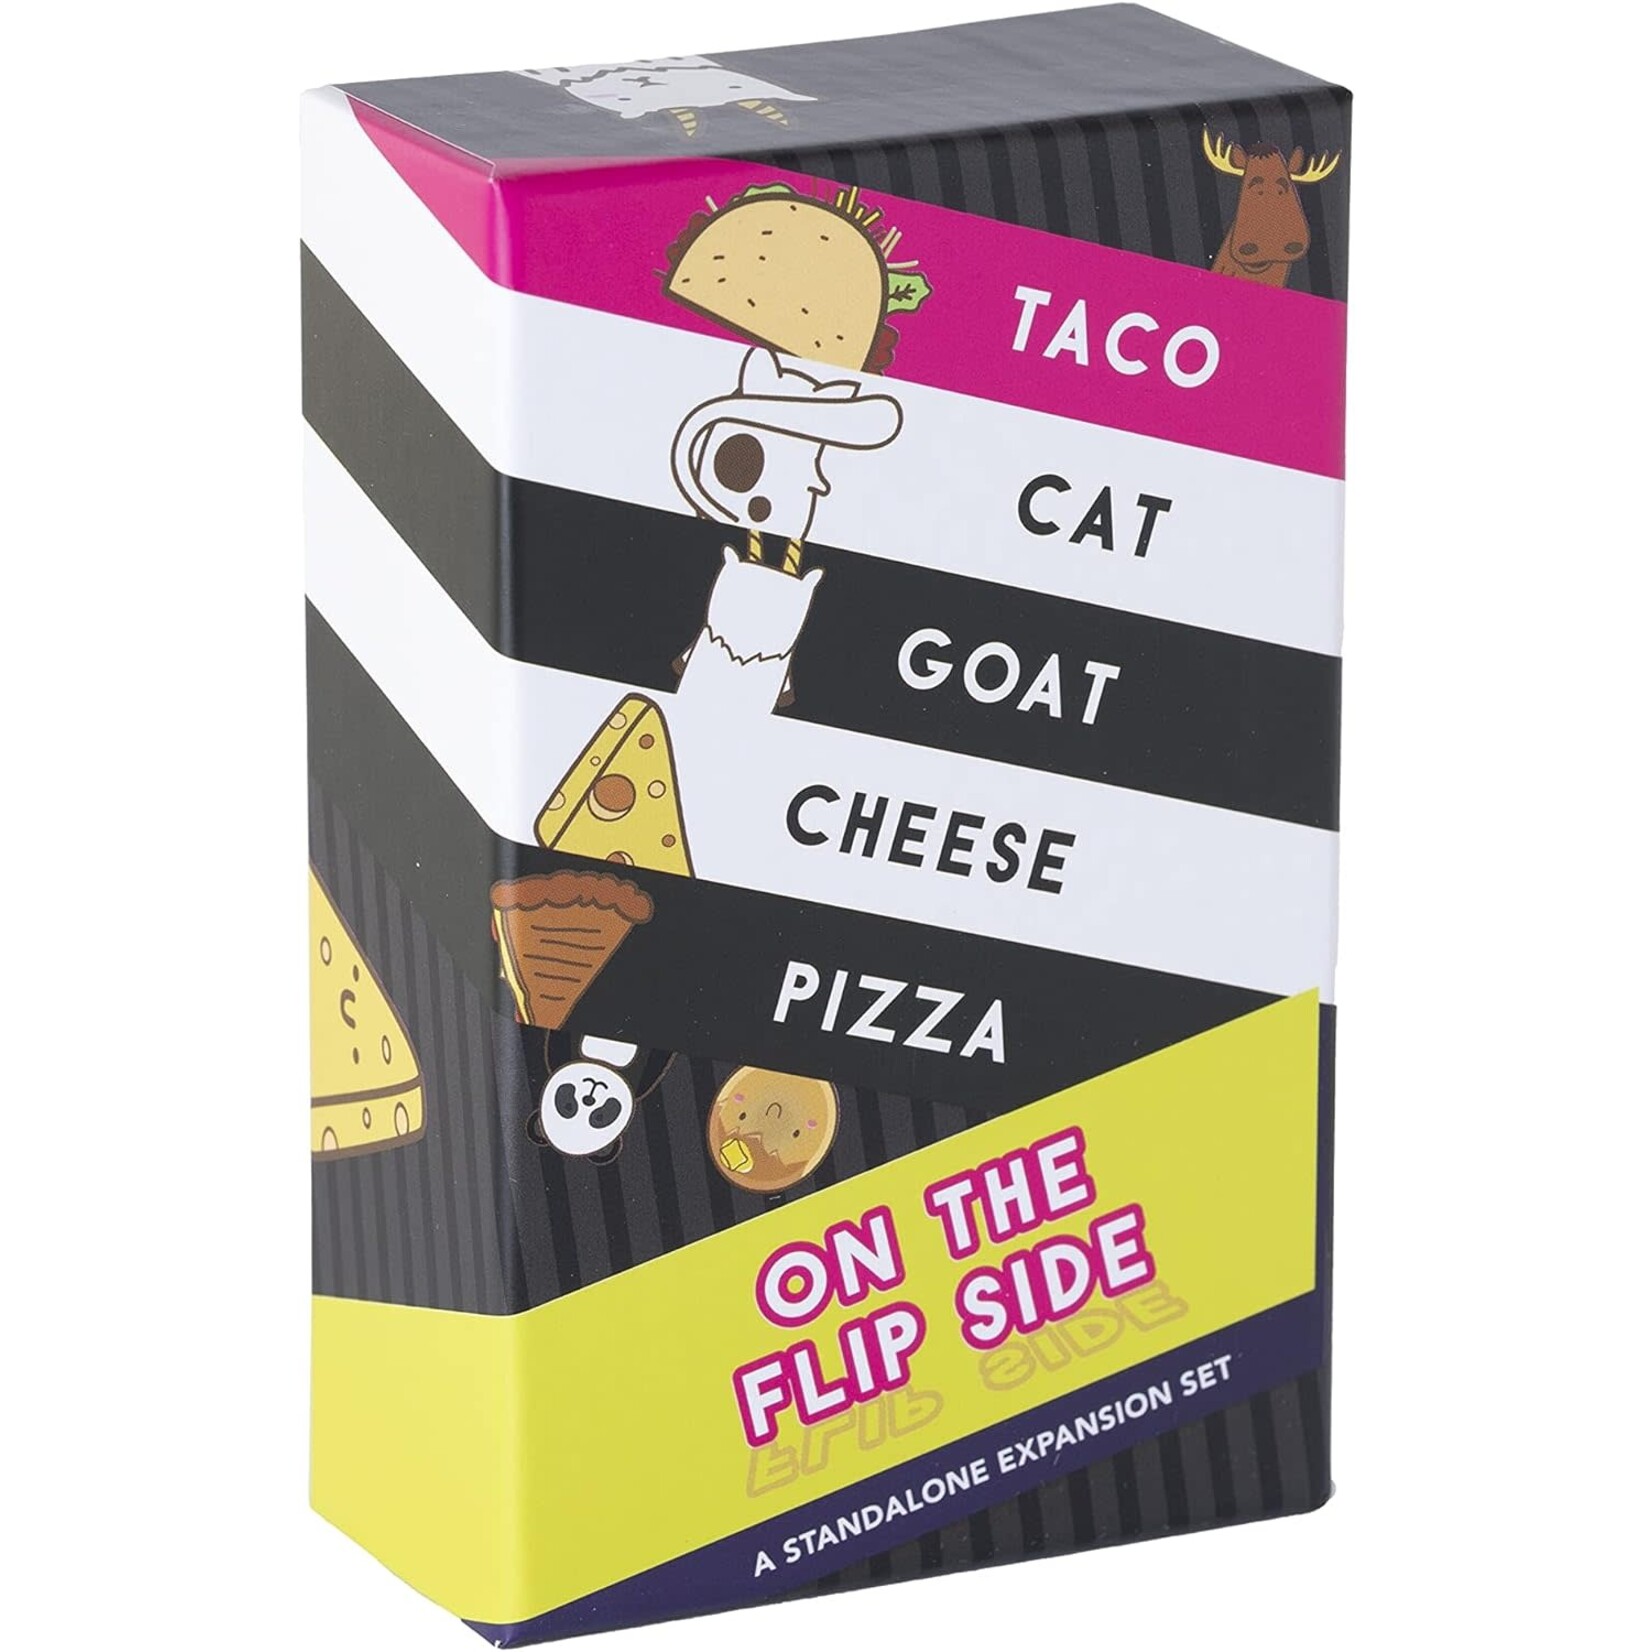 Dolphin Hat Games Taco Cat Goat Cheese Pizza: On The Flip Side (Standalone or Expansion)